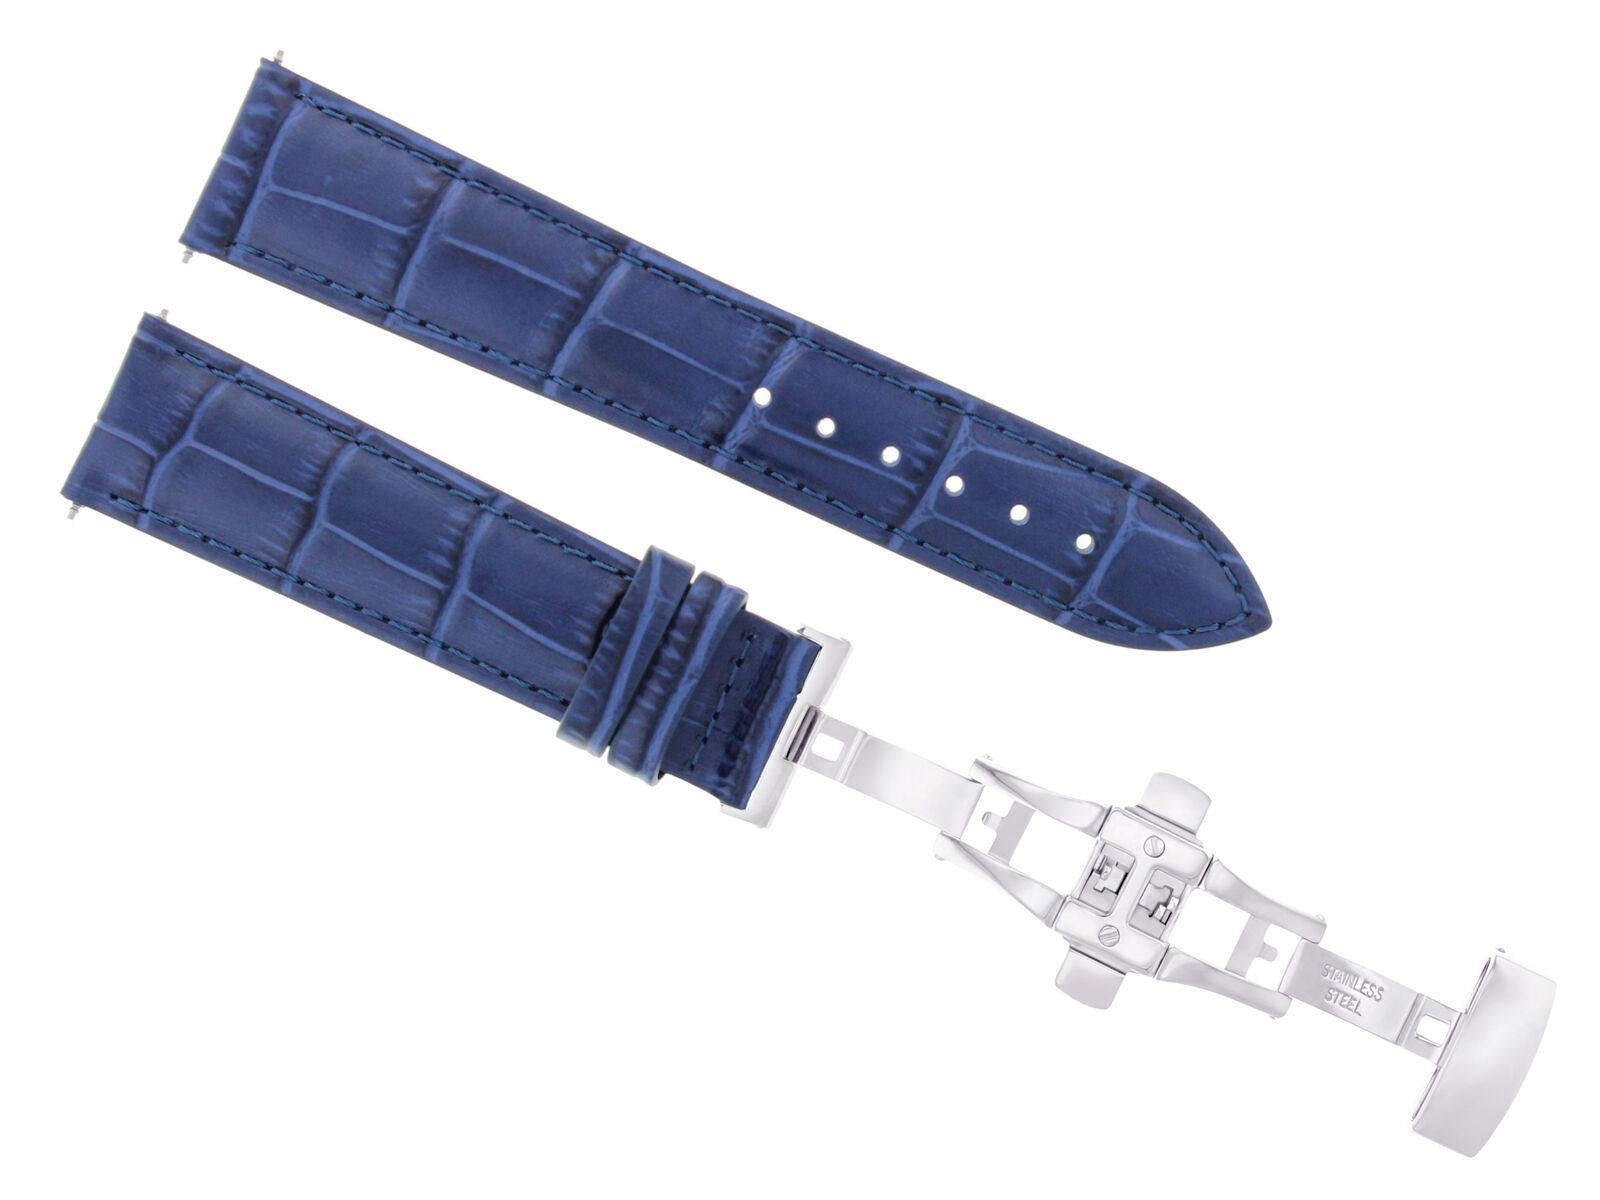 18MM LEATHER STRAP BAND WATCH DEPLOYMENT CLASP FOR JAEGER LECOULTRE WATCH BLUE